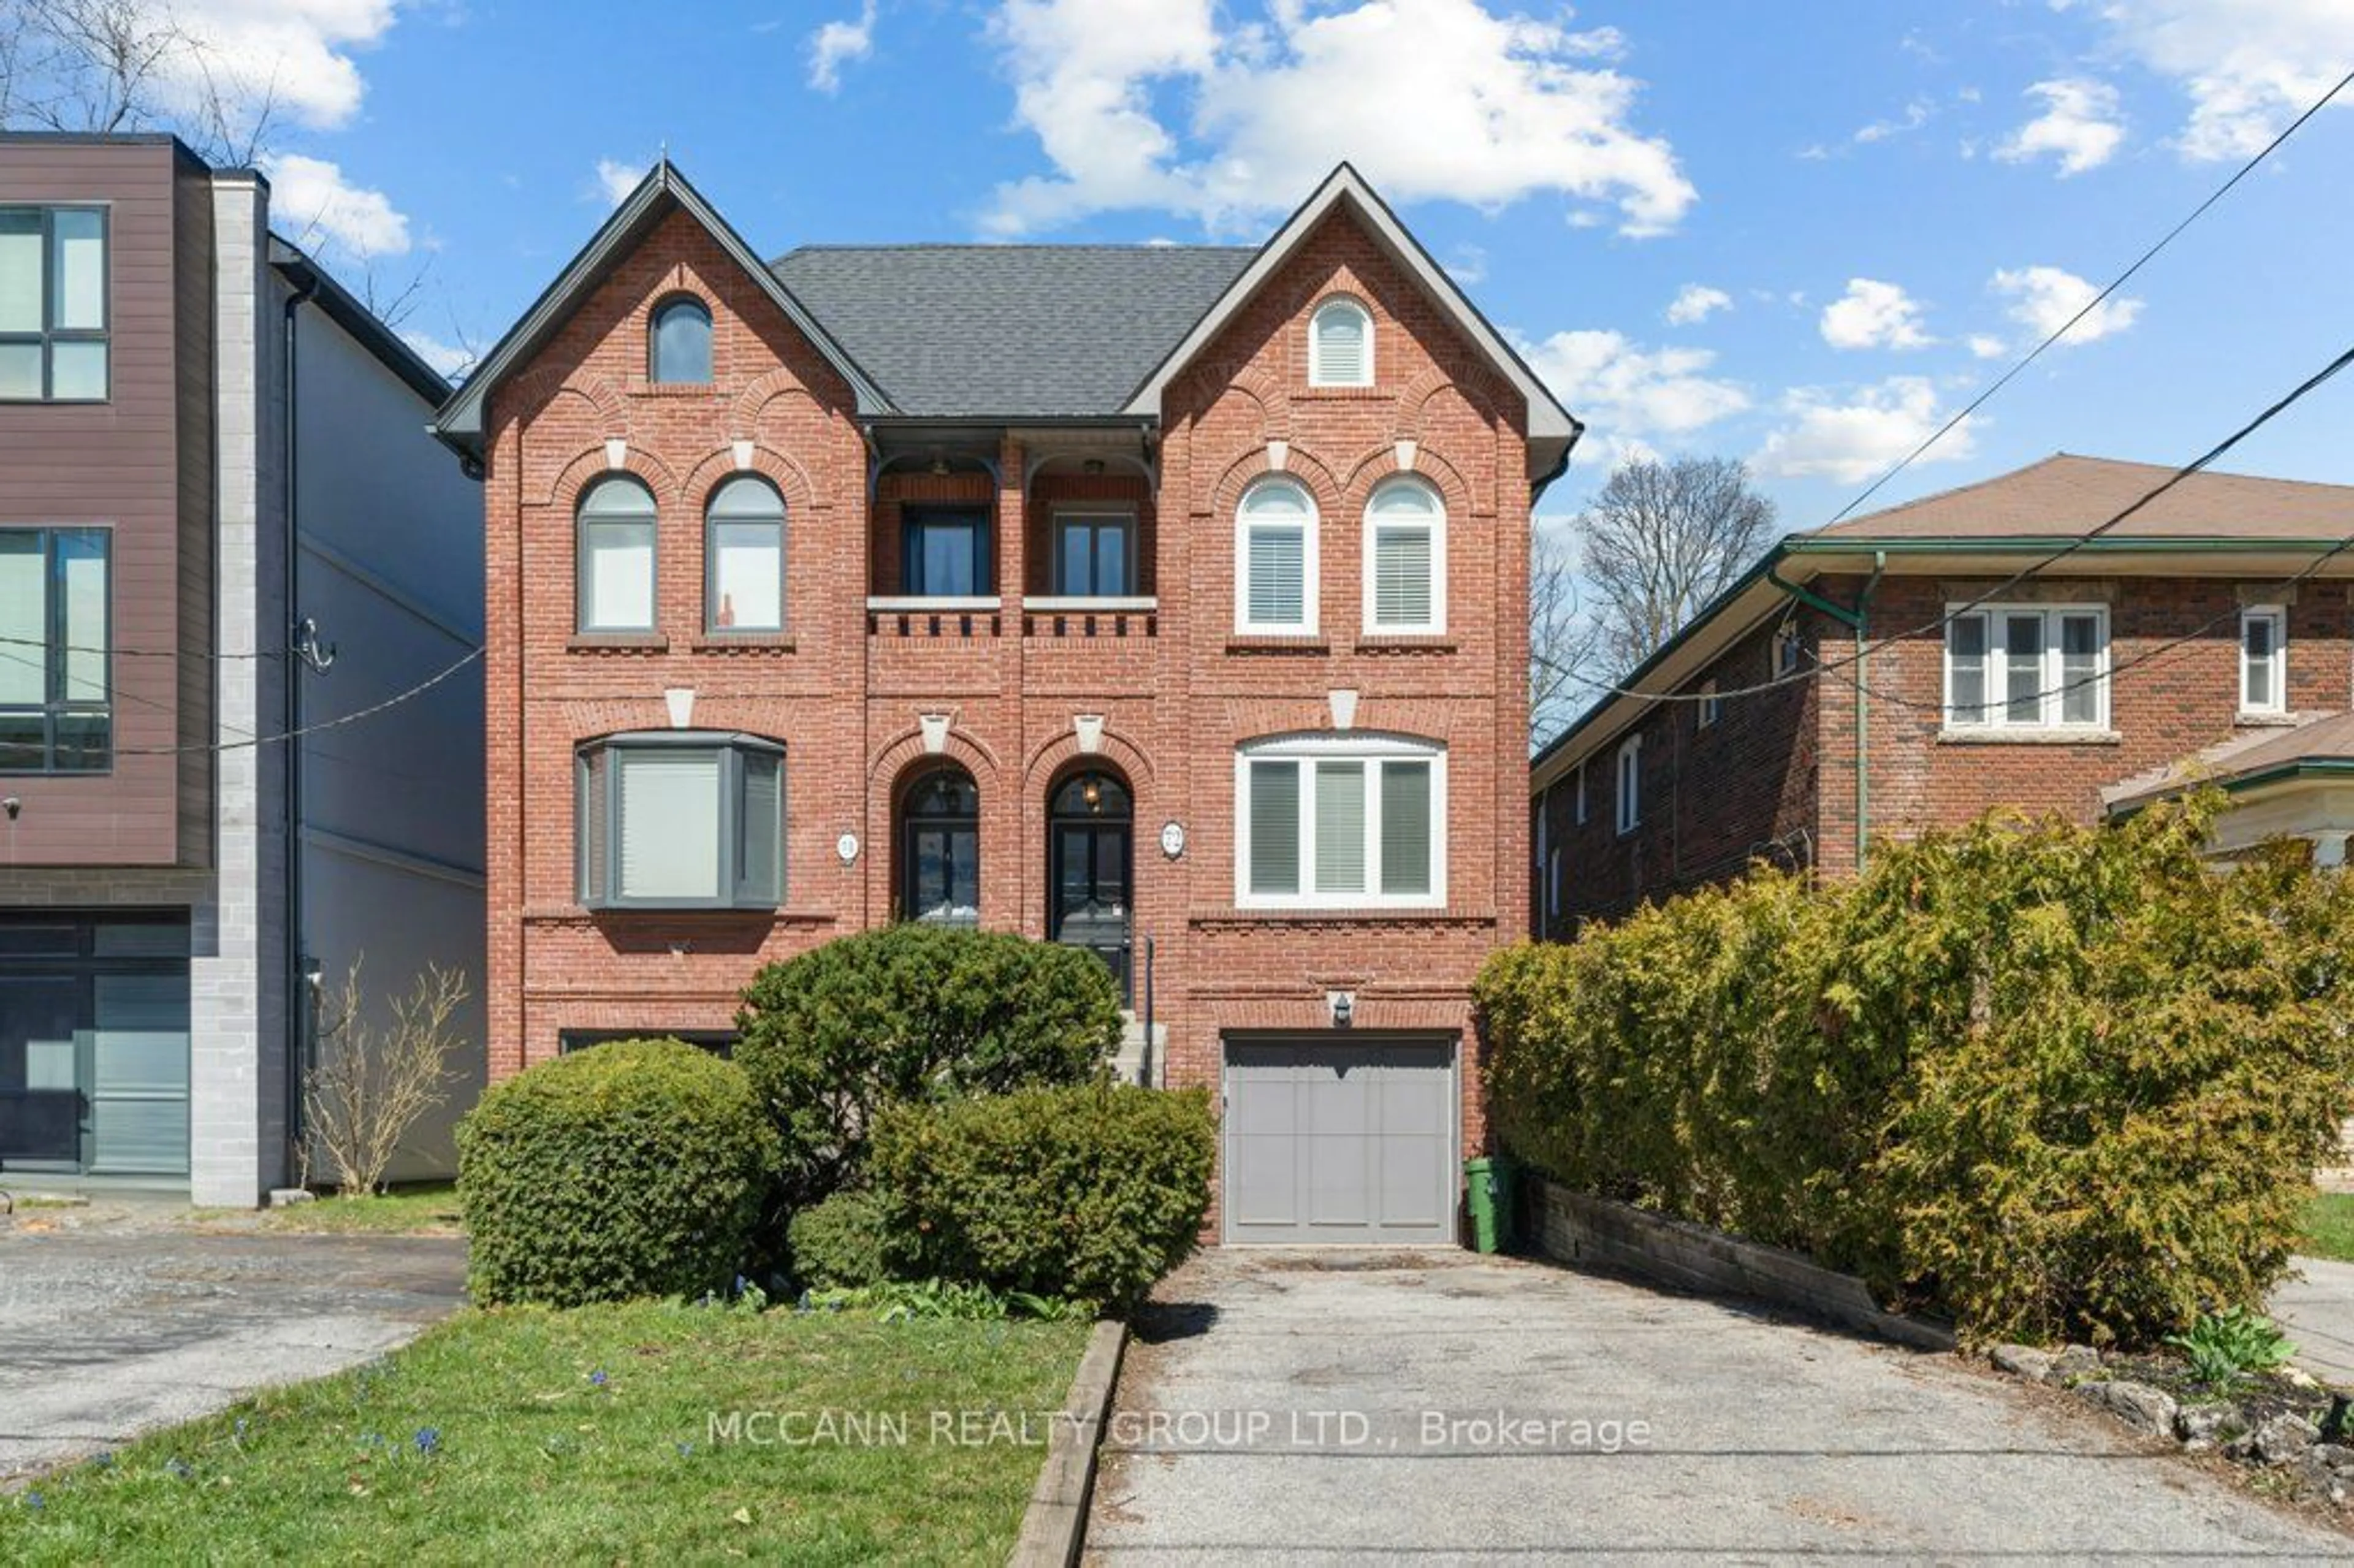 Home with brick exterior material for 72 Keewatin Ave, Toronto Ontario M4P 1Z8